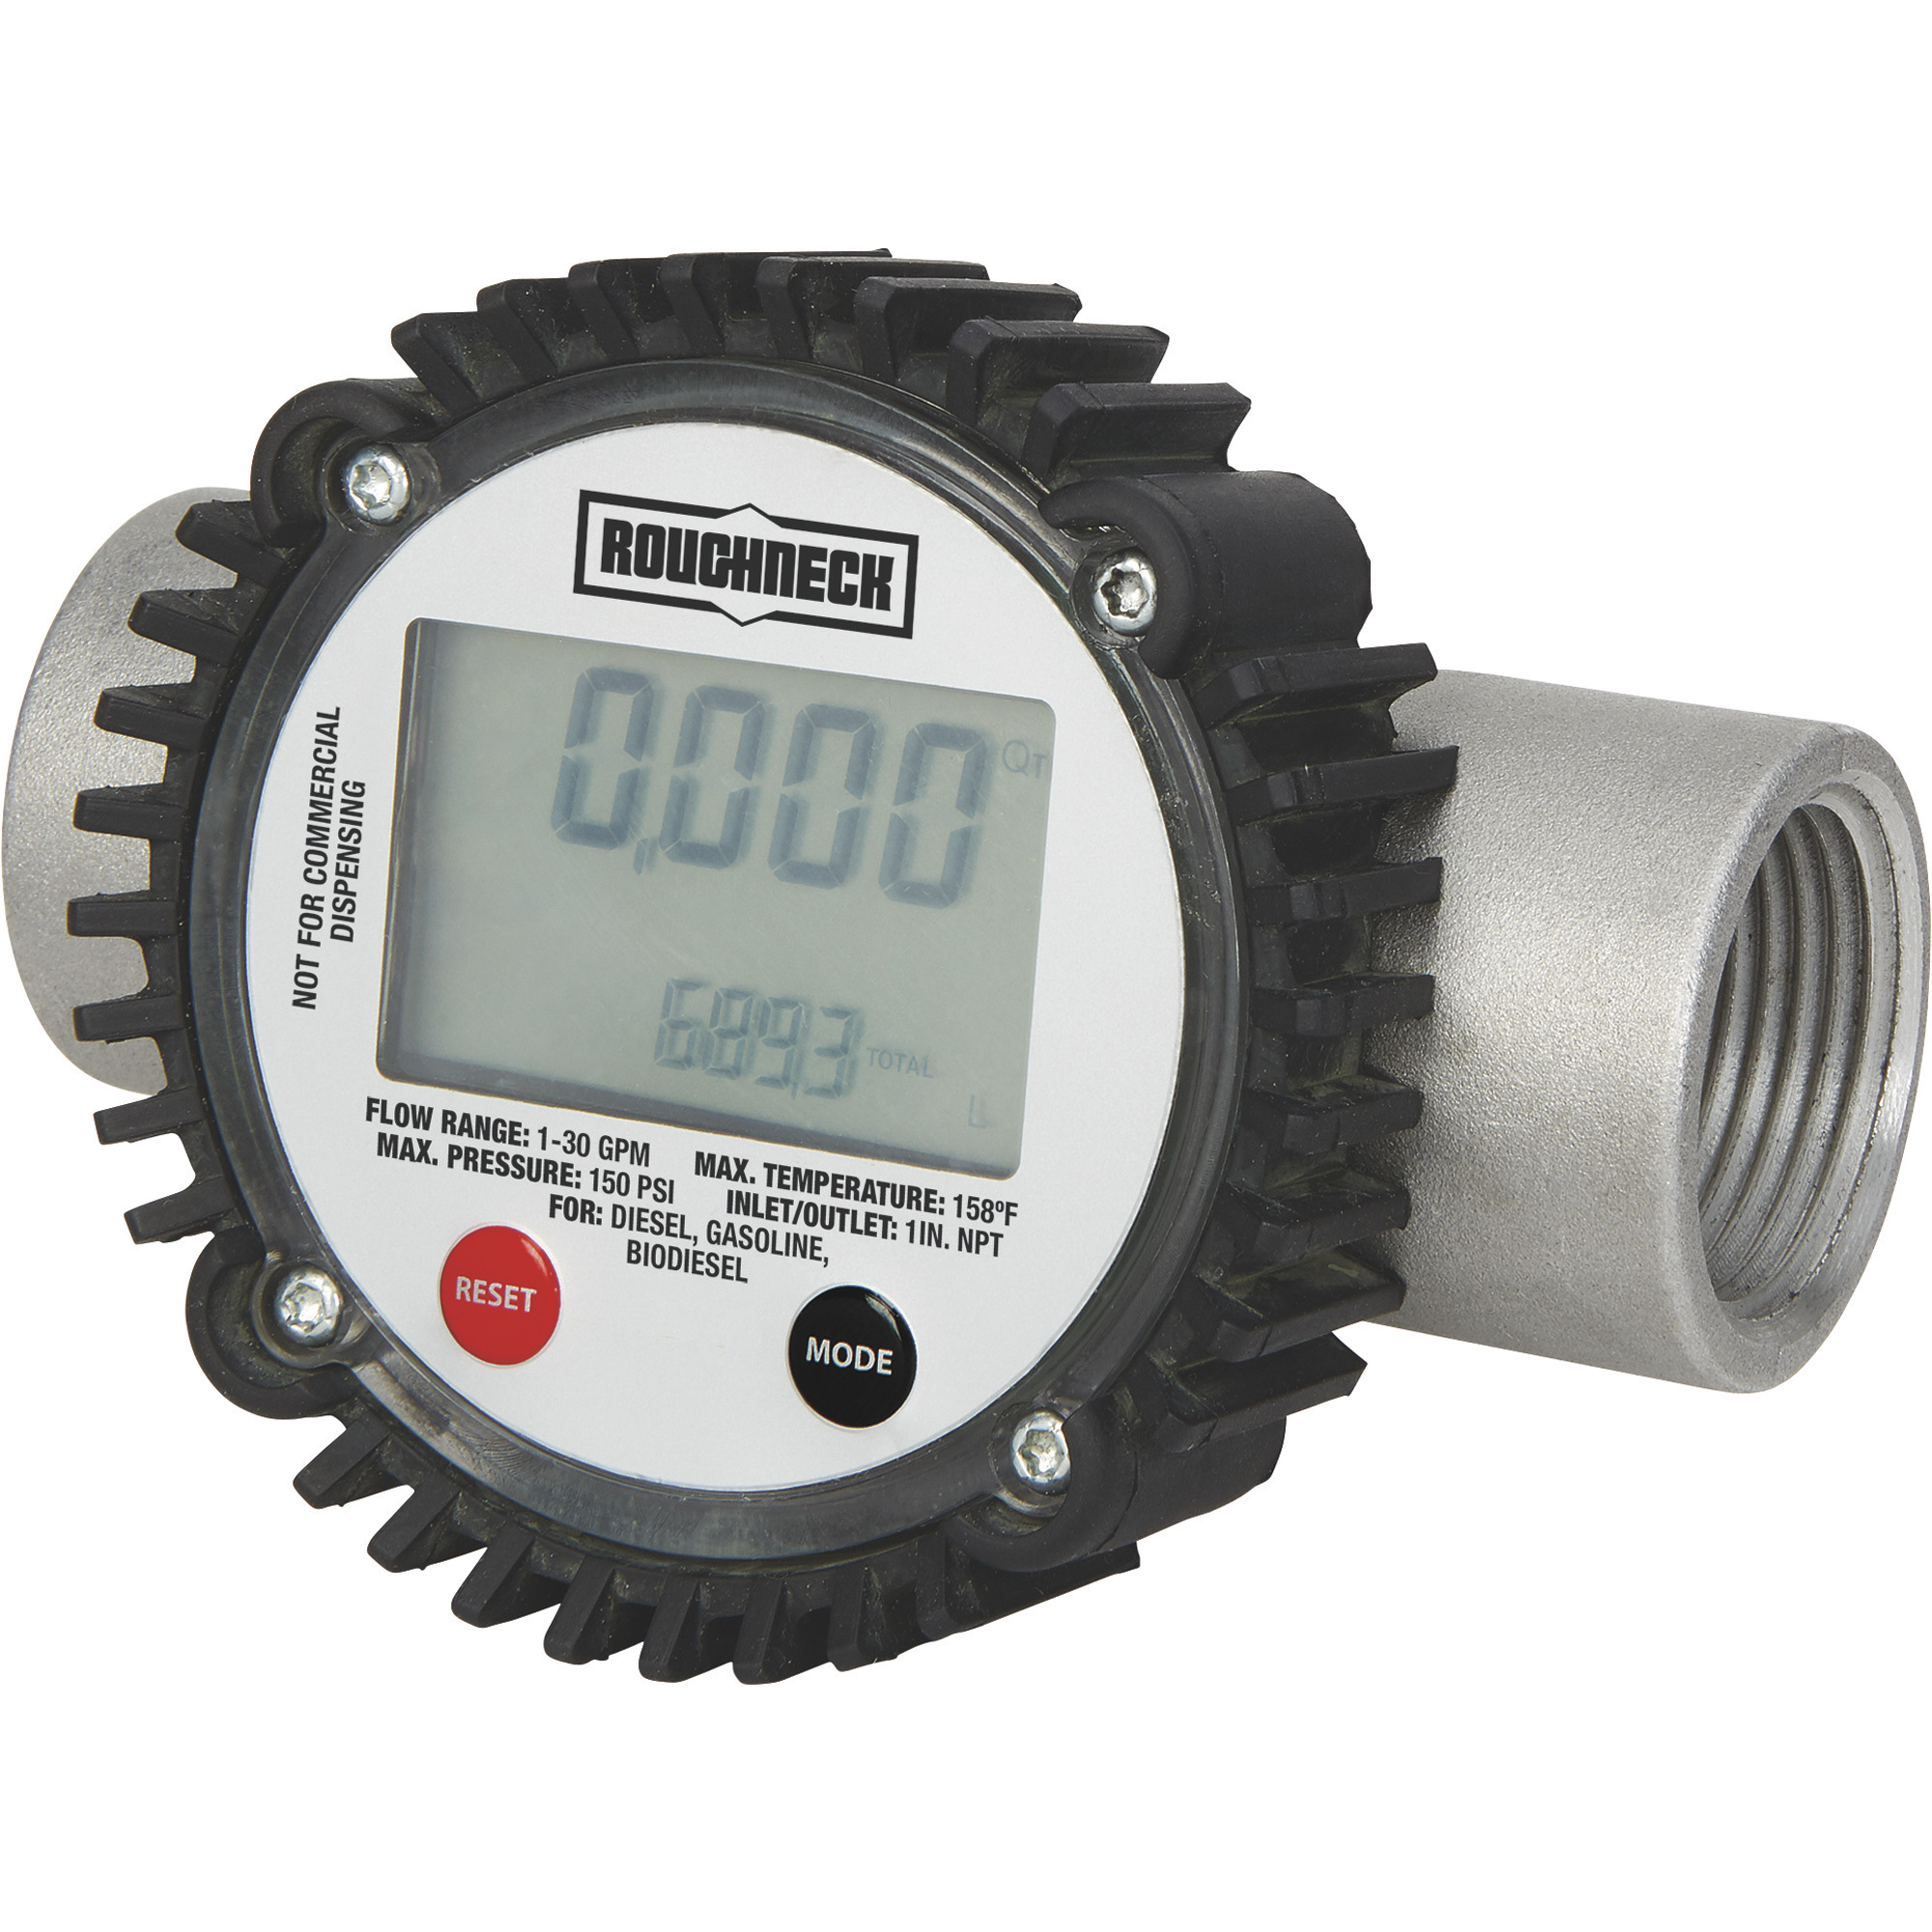 Roughneck Digital Fuel Meter, 1-30 GPM, 1Inch Inlet/Outlet